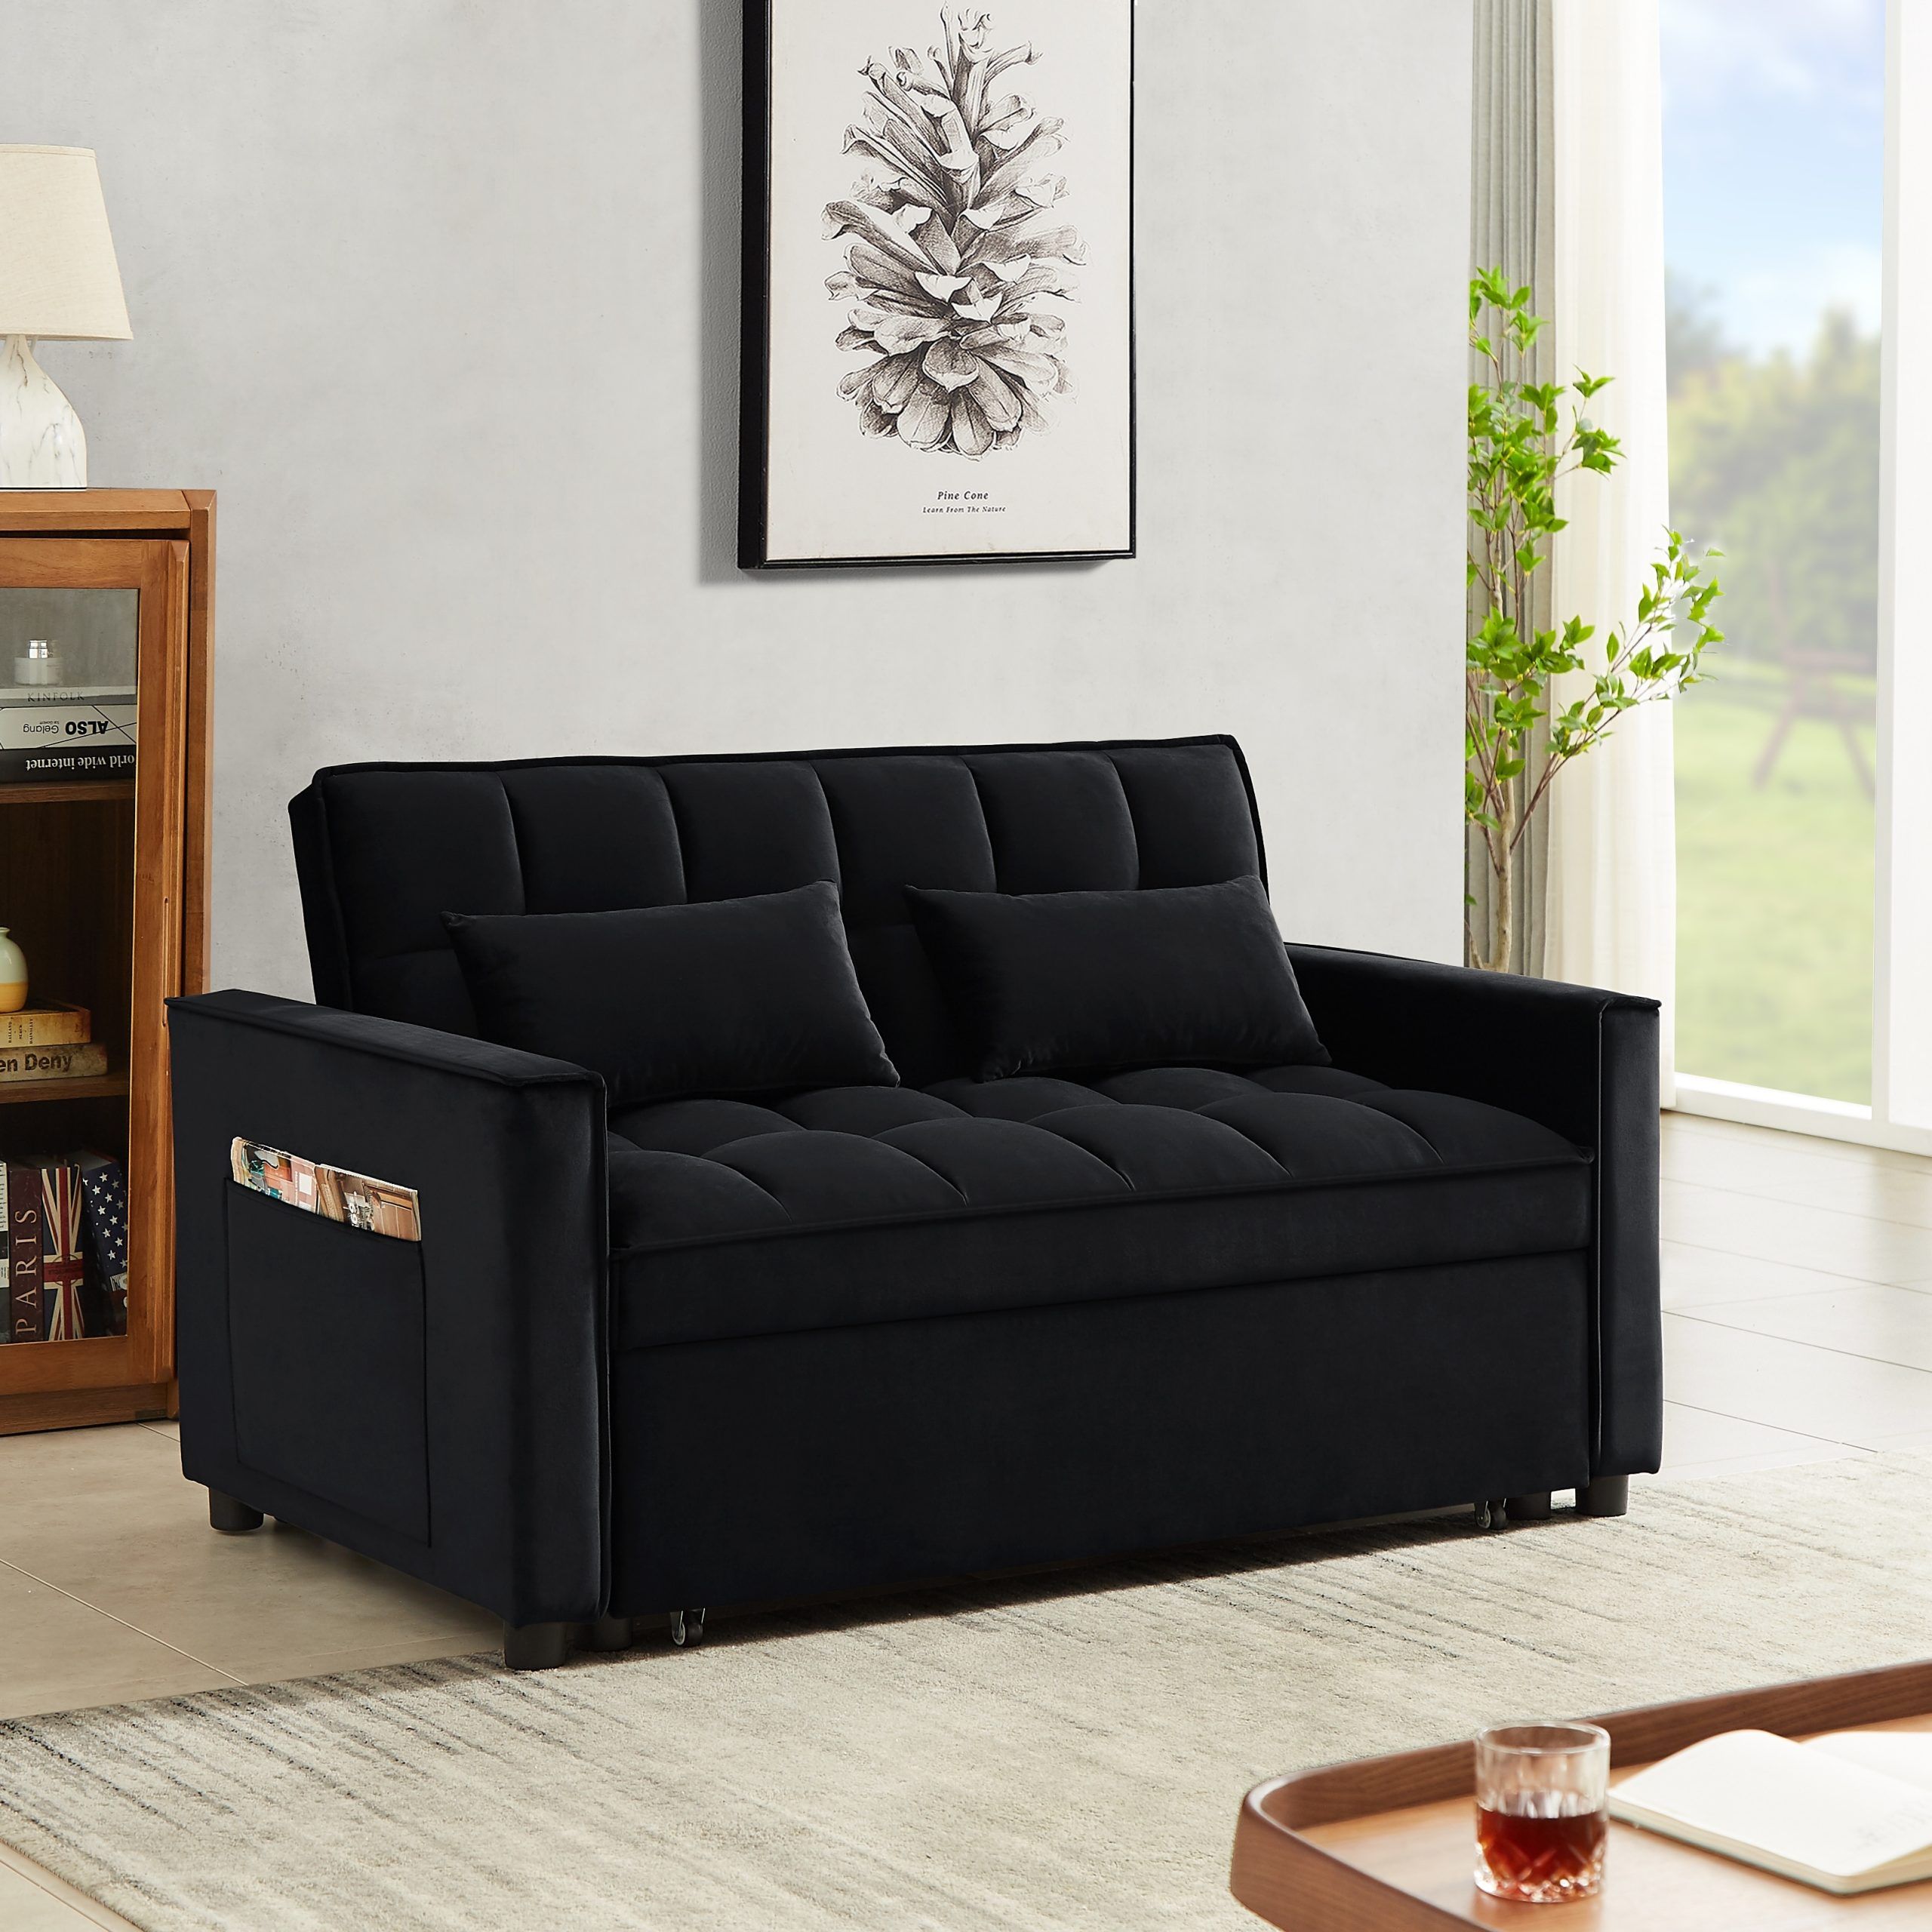 Velvet Convertible Loveseat Sleeper Sofa Couch With Adjustable Backrest, 2  Seater Sofa With Pull Out Bed With 2 Lumbar Pillows – Bed Bath & Beyond –  38905693 Intended For Black Velvet 2 Seater Sofa Beds (View 8 of 15)